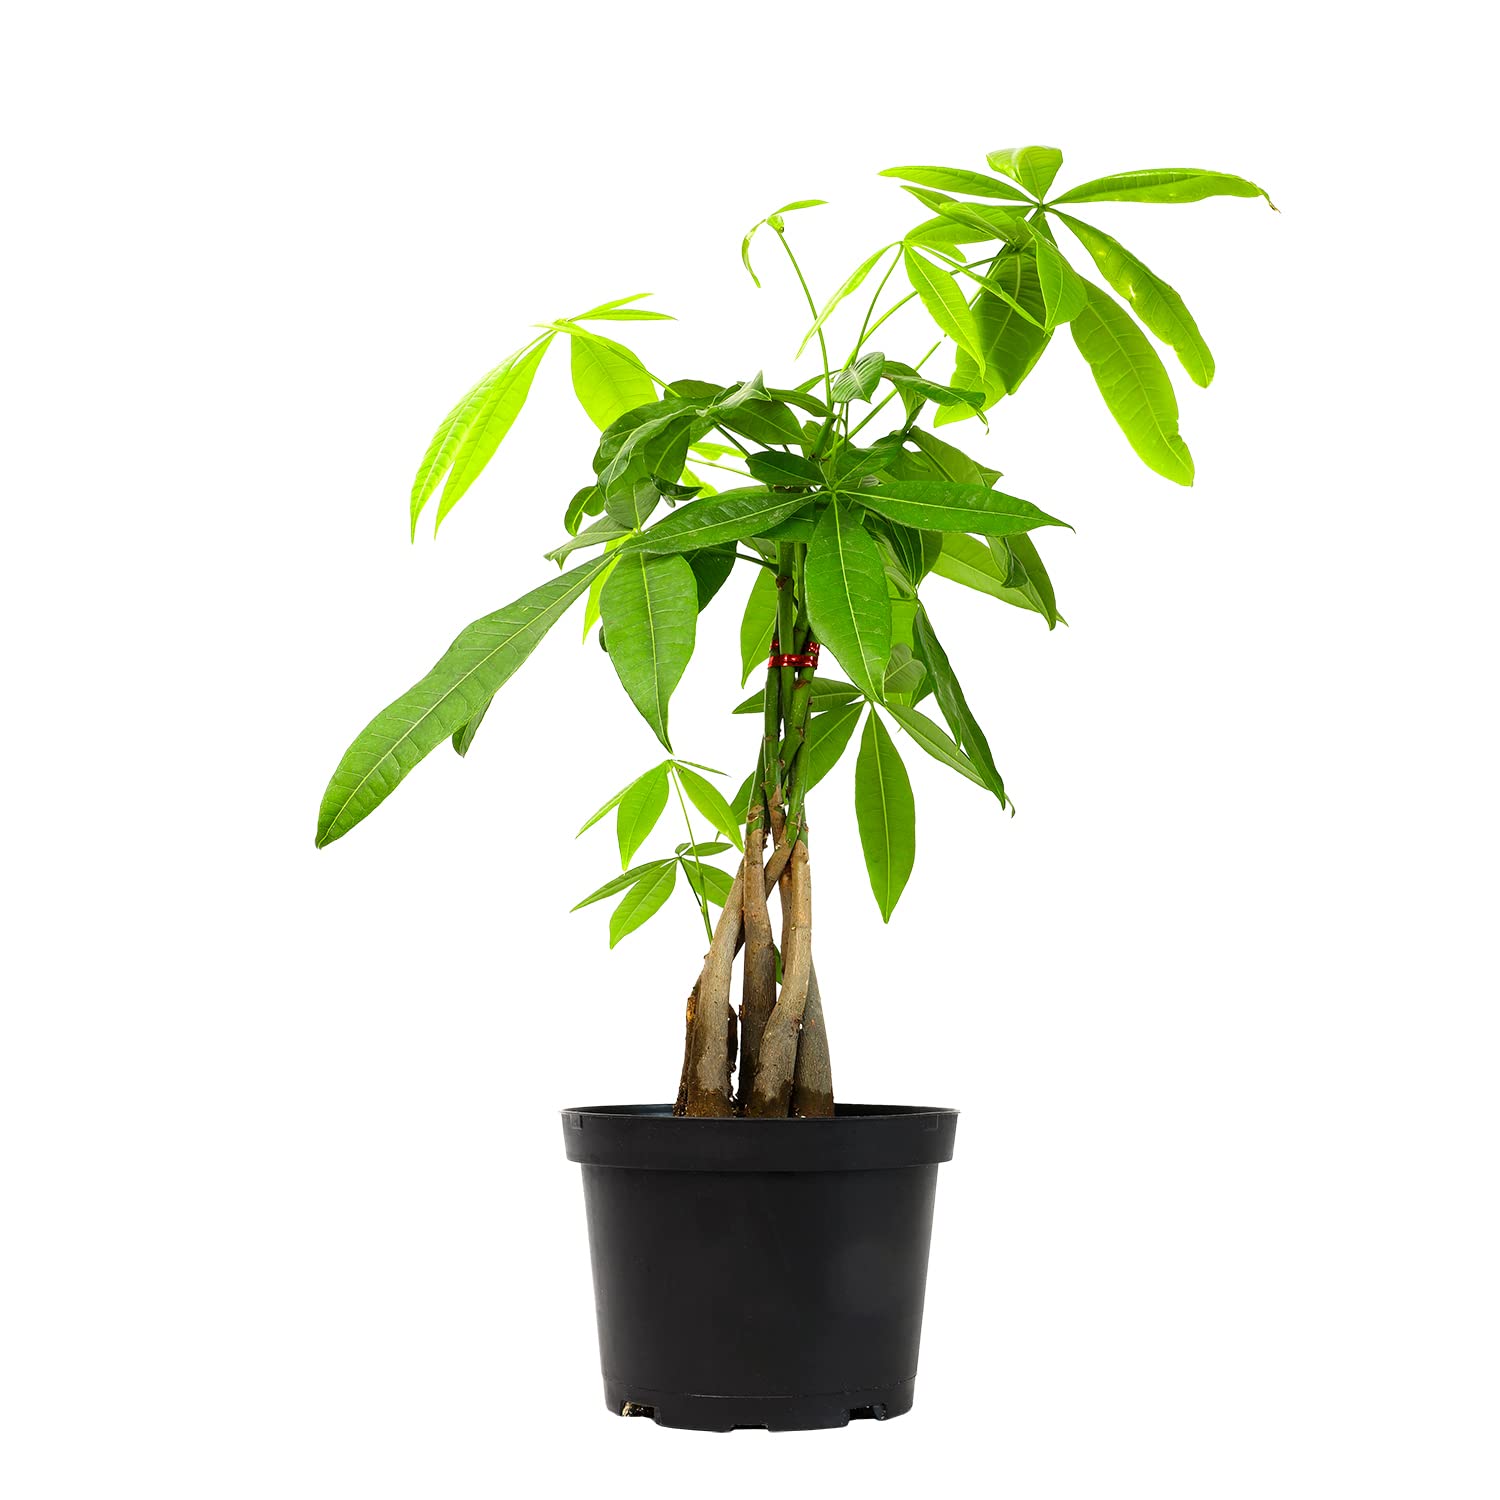 Plants for Pets Money Tree Indoor House Plant (6" Pot) $19.11 + Free Shipping w/ Prime or on $35+